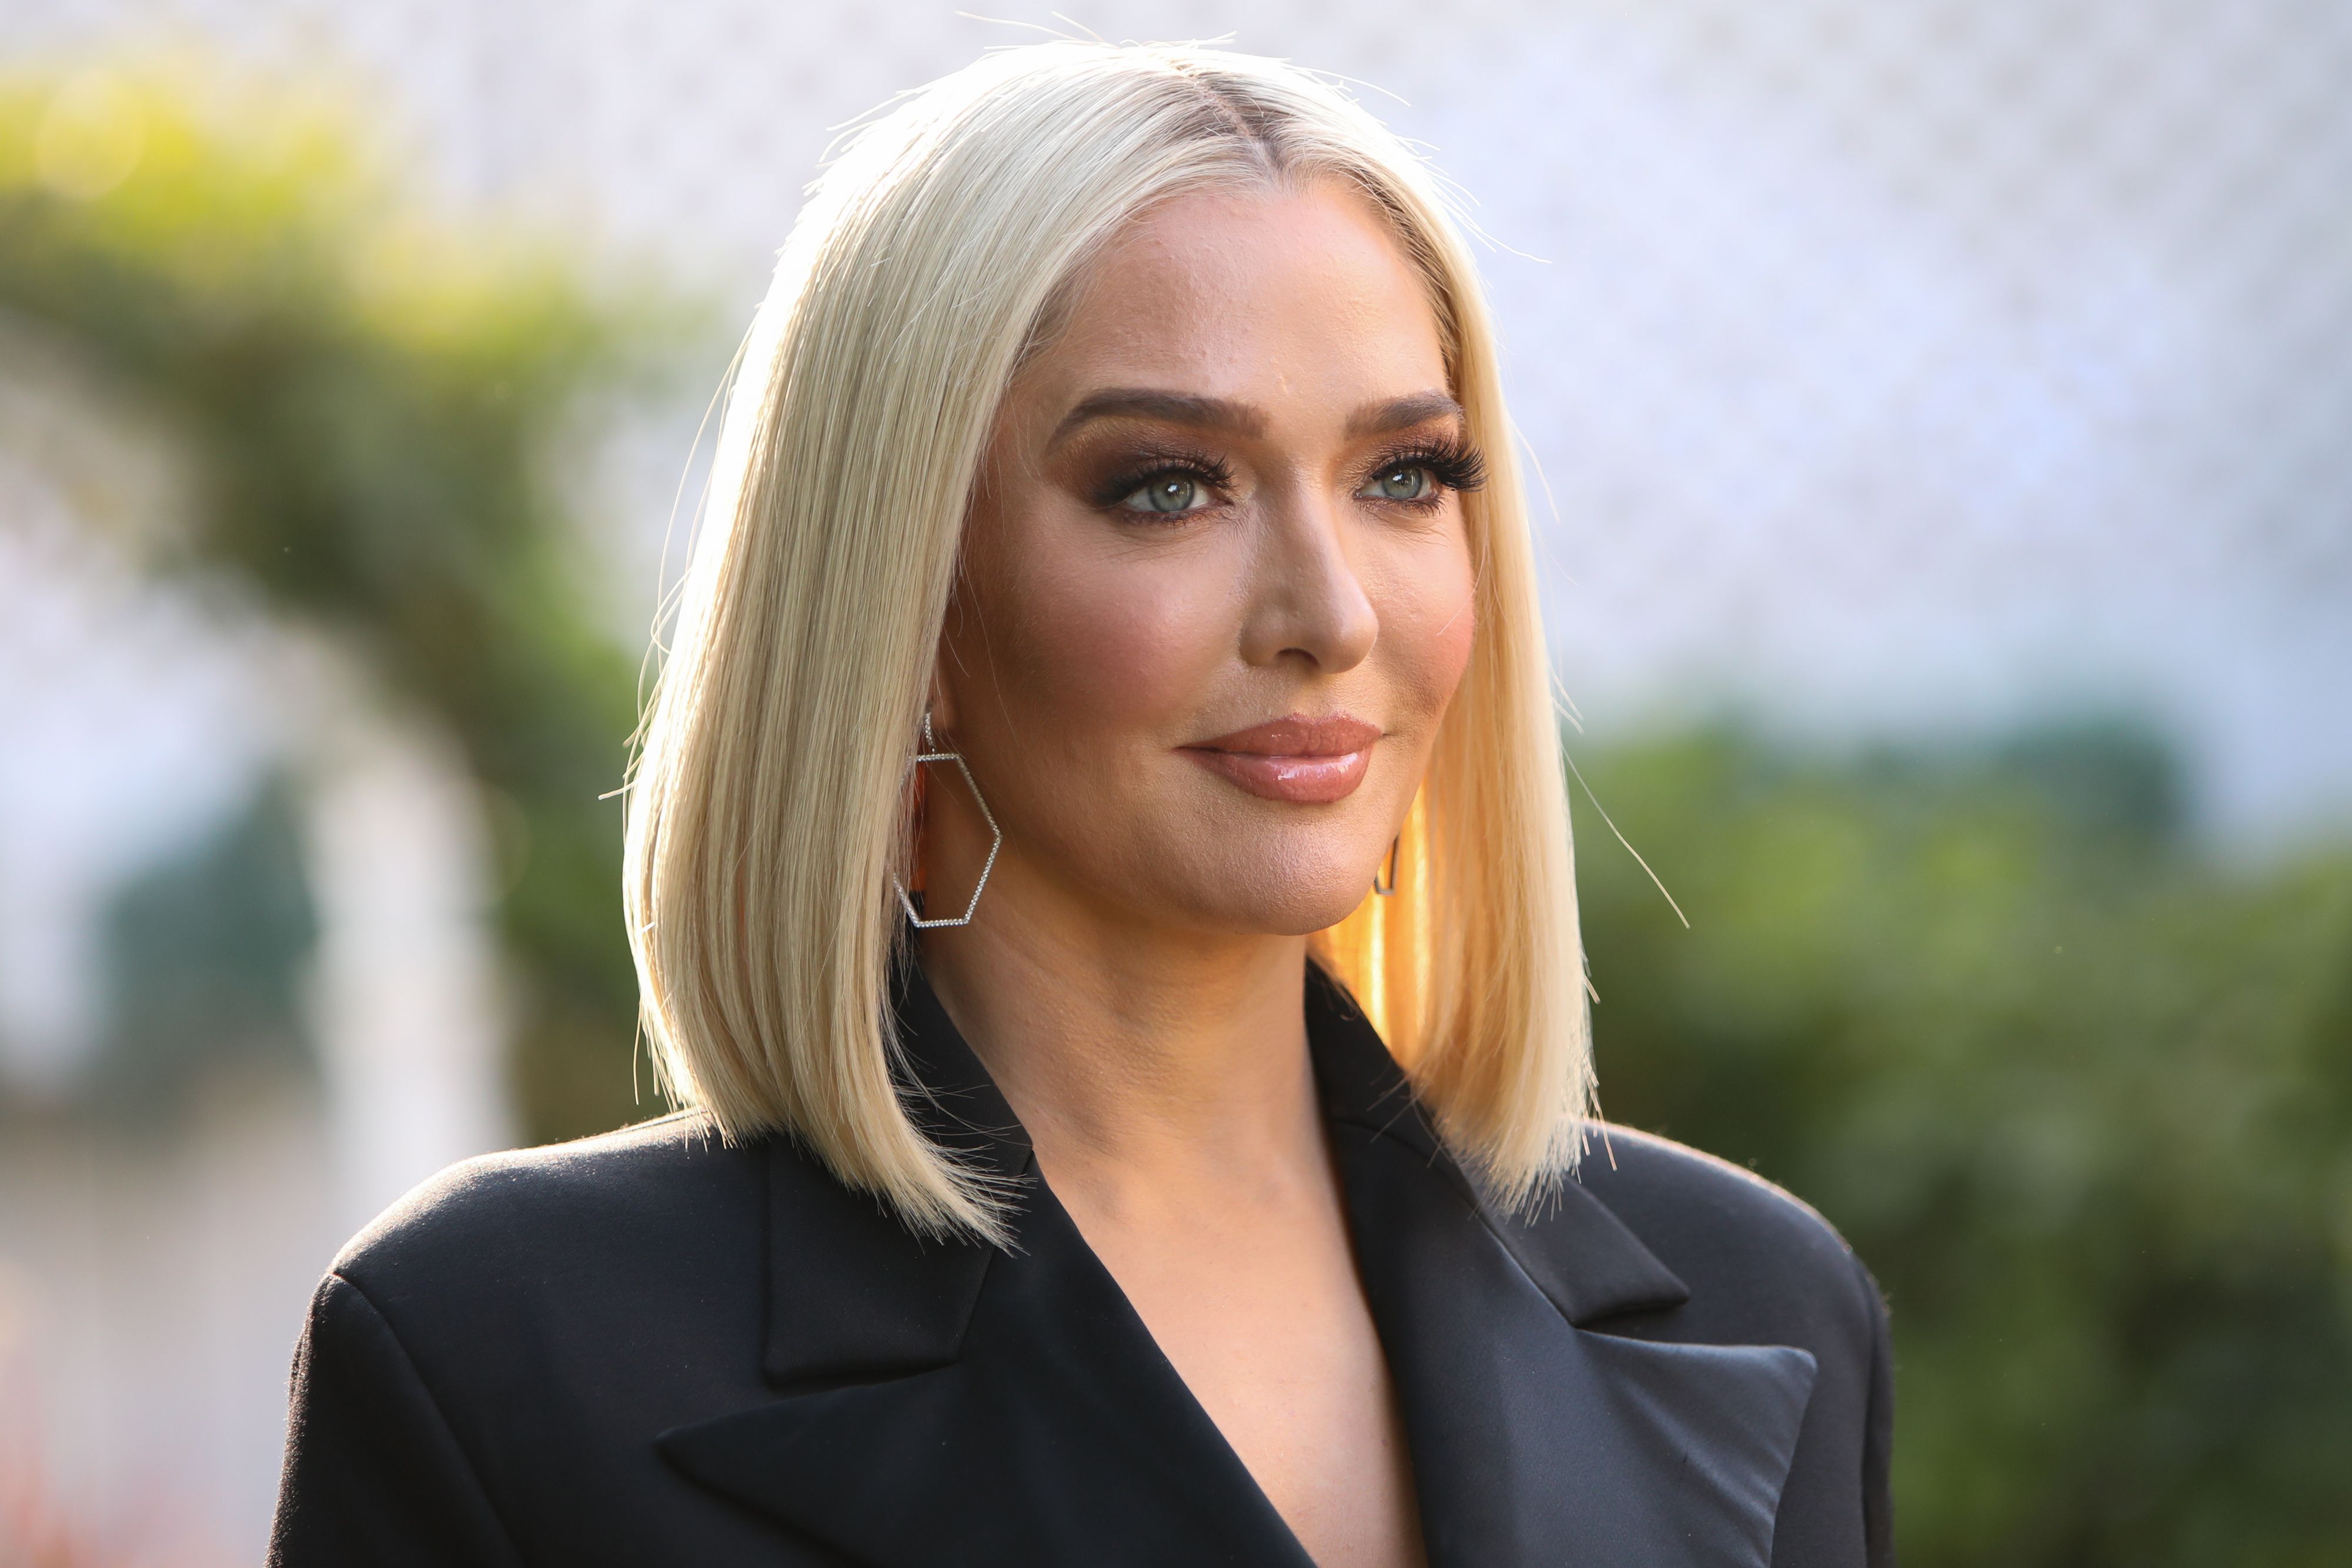 Erika Jayne at Hallmark Channel's "Home & Family" on November 11, 2019, in Universal City, California | Source: Getty Images